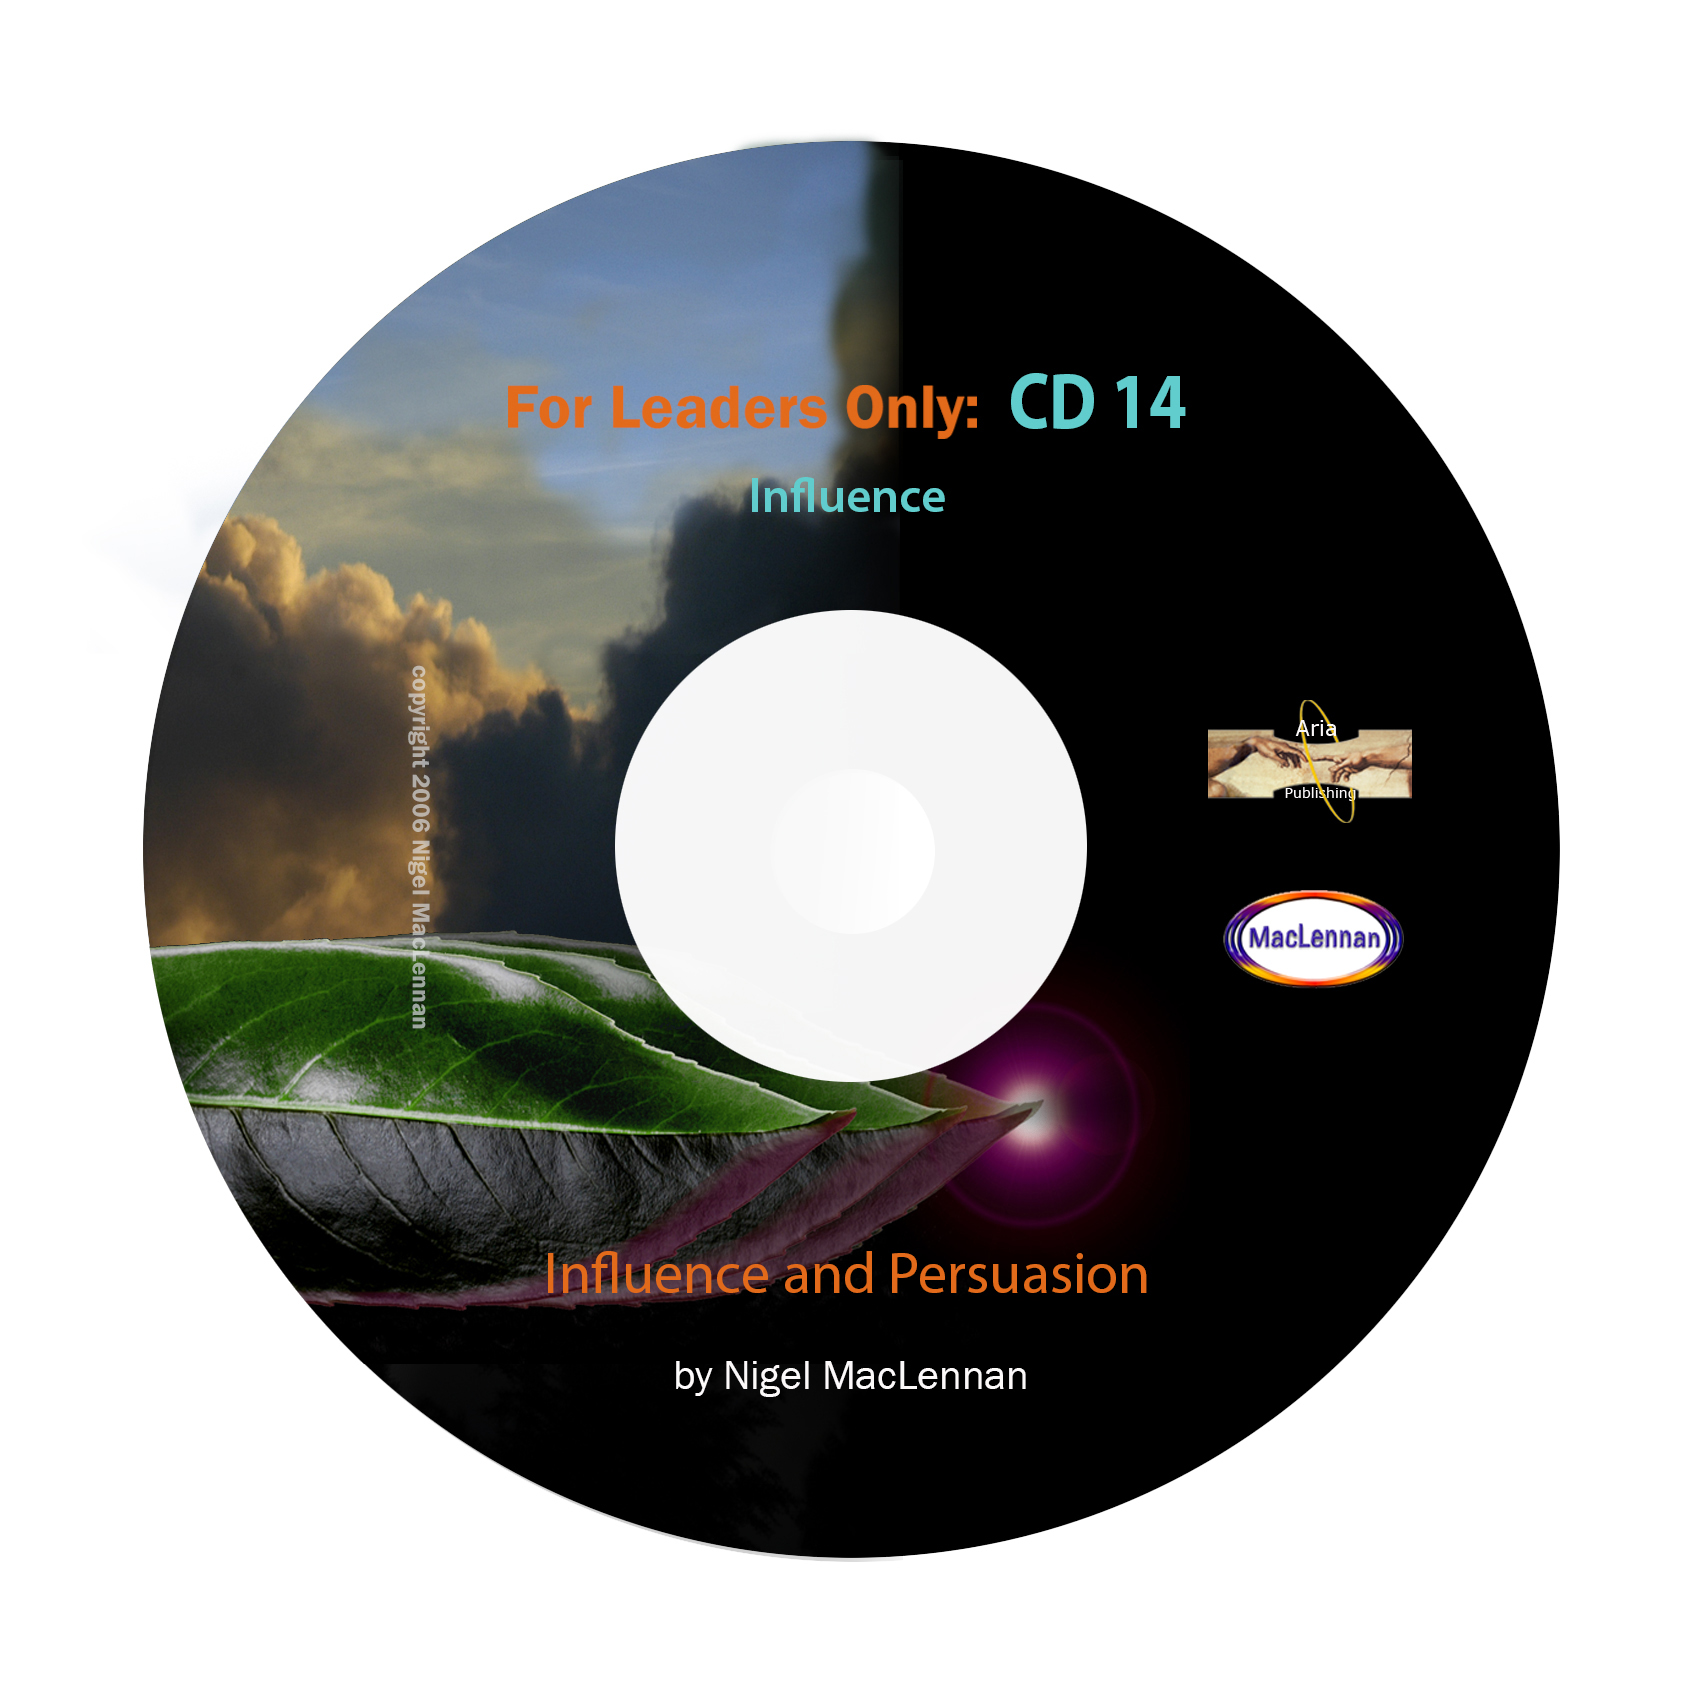 For Leaders Only - Influence and Persuasion CD